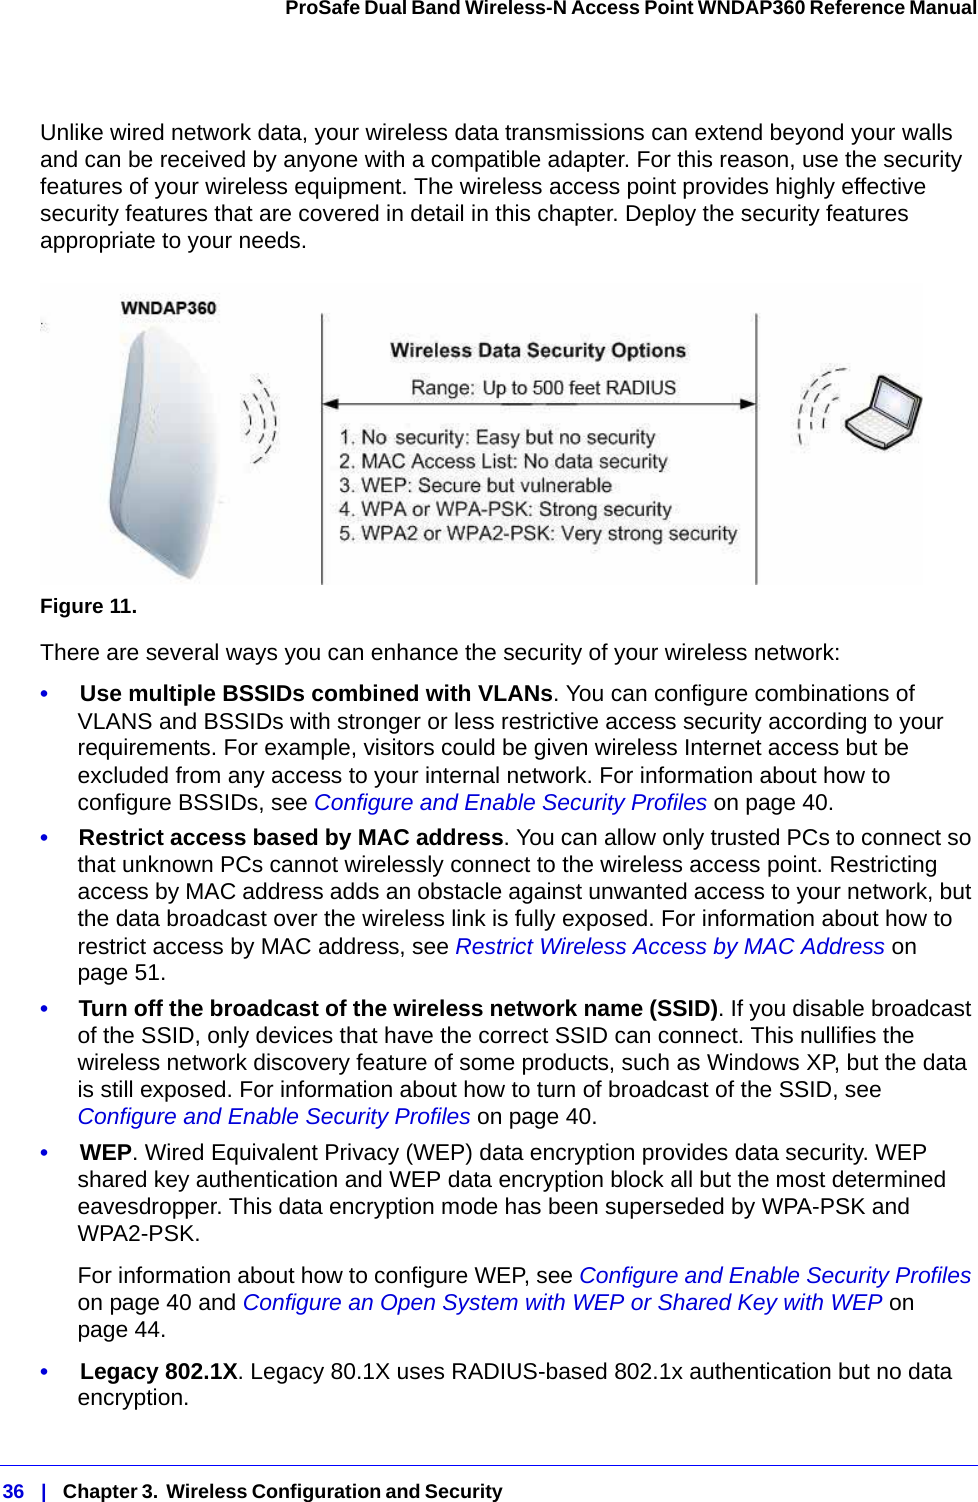 36   |   Chapter 3.  Wireless Configuration and Security  ProSafe Dual Band Wireless-N Access Point WNDAP360 Reference Manual Unlike wired network data, your wireless data transmissions can extend beyond your walls and can be received by anyone with a compatible adapter. For this reason, use the security features of your wireless equipment. The wireless access point provides highly effective security features that are covered in detail in this chapter. Deploy the security features appropriate to your needs.Figure 11. There are several ways you can enhance the security of your wireless network:•     Use multiple BSSIDs combined with VLANs. You can configure combinations of VLANS and BSSIDs with stronger or less restrictive access security according to your requirements. For example, visitors could be given wireless Internet access but be excluded from any access to your internal network. For information about how to configure BSSIDs, see Configure and Enable Security Profiles on page 40.•     Restrict access based by MAC address. You can allow only trusted PCs to connect so that unknown PCs cannot wirelessly connect to the wireless access point. Restricting access by MAC address adds an obstacle against unwanted access to your network, but the data broadcast over the wireless link is fully exposed. For information about how to restrict access by MAC address, see Restrict Wireless Access by MAC Address on page 51.•     Turn off the broadcast of the wireless network name (SSID). If you disable broadcast of the SSID, only devices that have the correct SSID can connect. This nullifies the wireless network discovery feature of some products, such as Windows XP, but the data is still exposed. For information about how to turn of broadcast of the SSID, see Configure and Enable Security Profiles on page 40.•     WEP. Wired Equivalent Privacy (WEP) data encryption provides data security. WEP shared key authentication and WEP data encryption block all but the most determined eavesdropper. This data encryption mode has been superseded by WPA-PSK and WPA2-PSK. For information about how to configure WEP, see Configure and Enable Security Profiles on page 40 and Configure an Open System with WEP or Shared Key with WEP on page 44.•     Legacy 802.1X. Legacy 80.1X uses RADIUS-based 802.1x authentication but no data encryption.